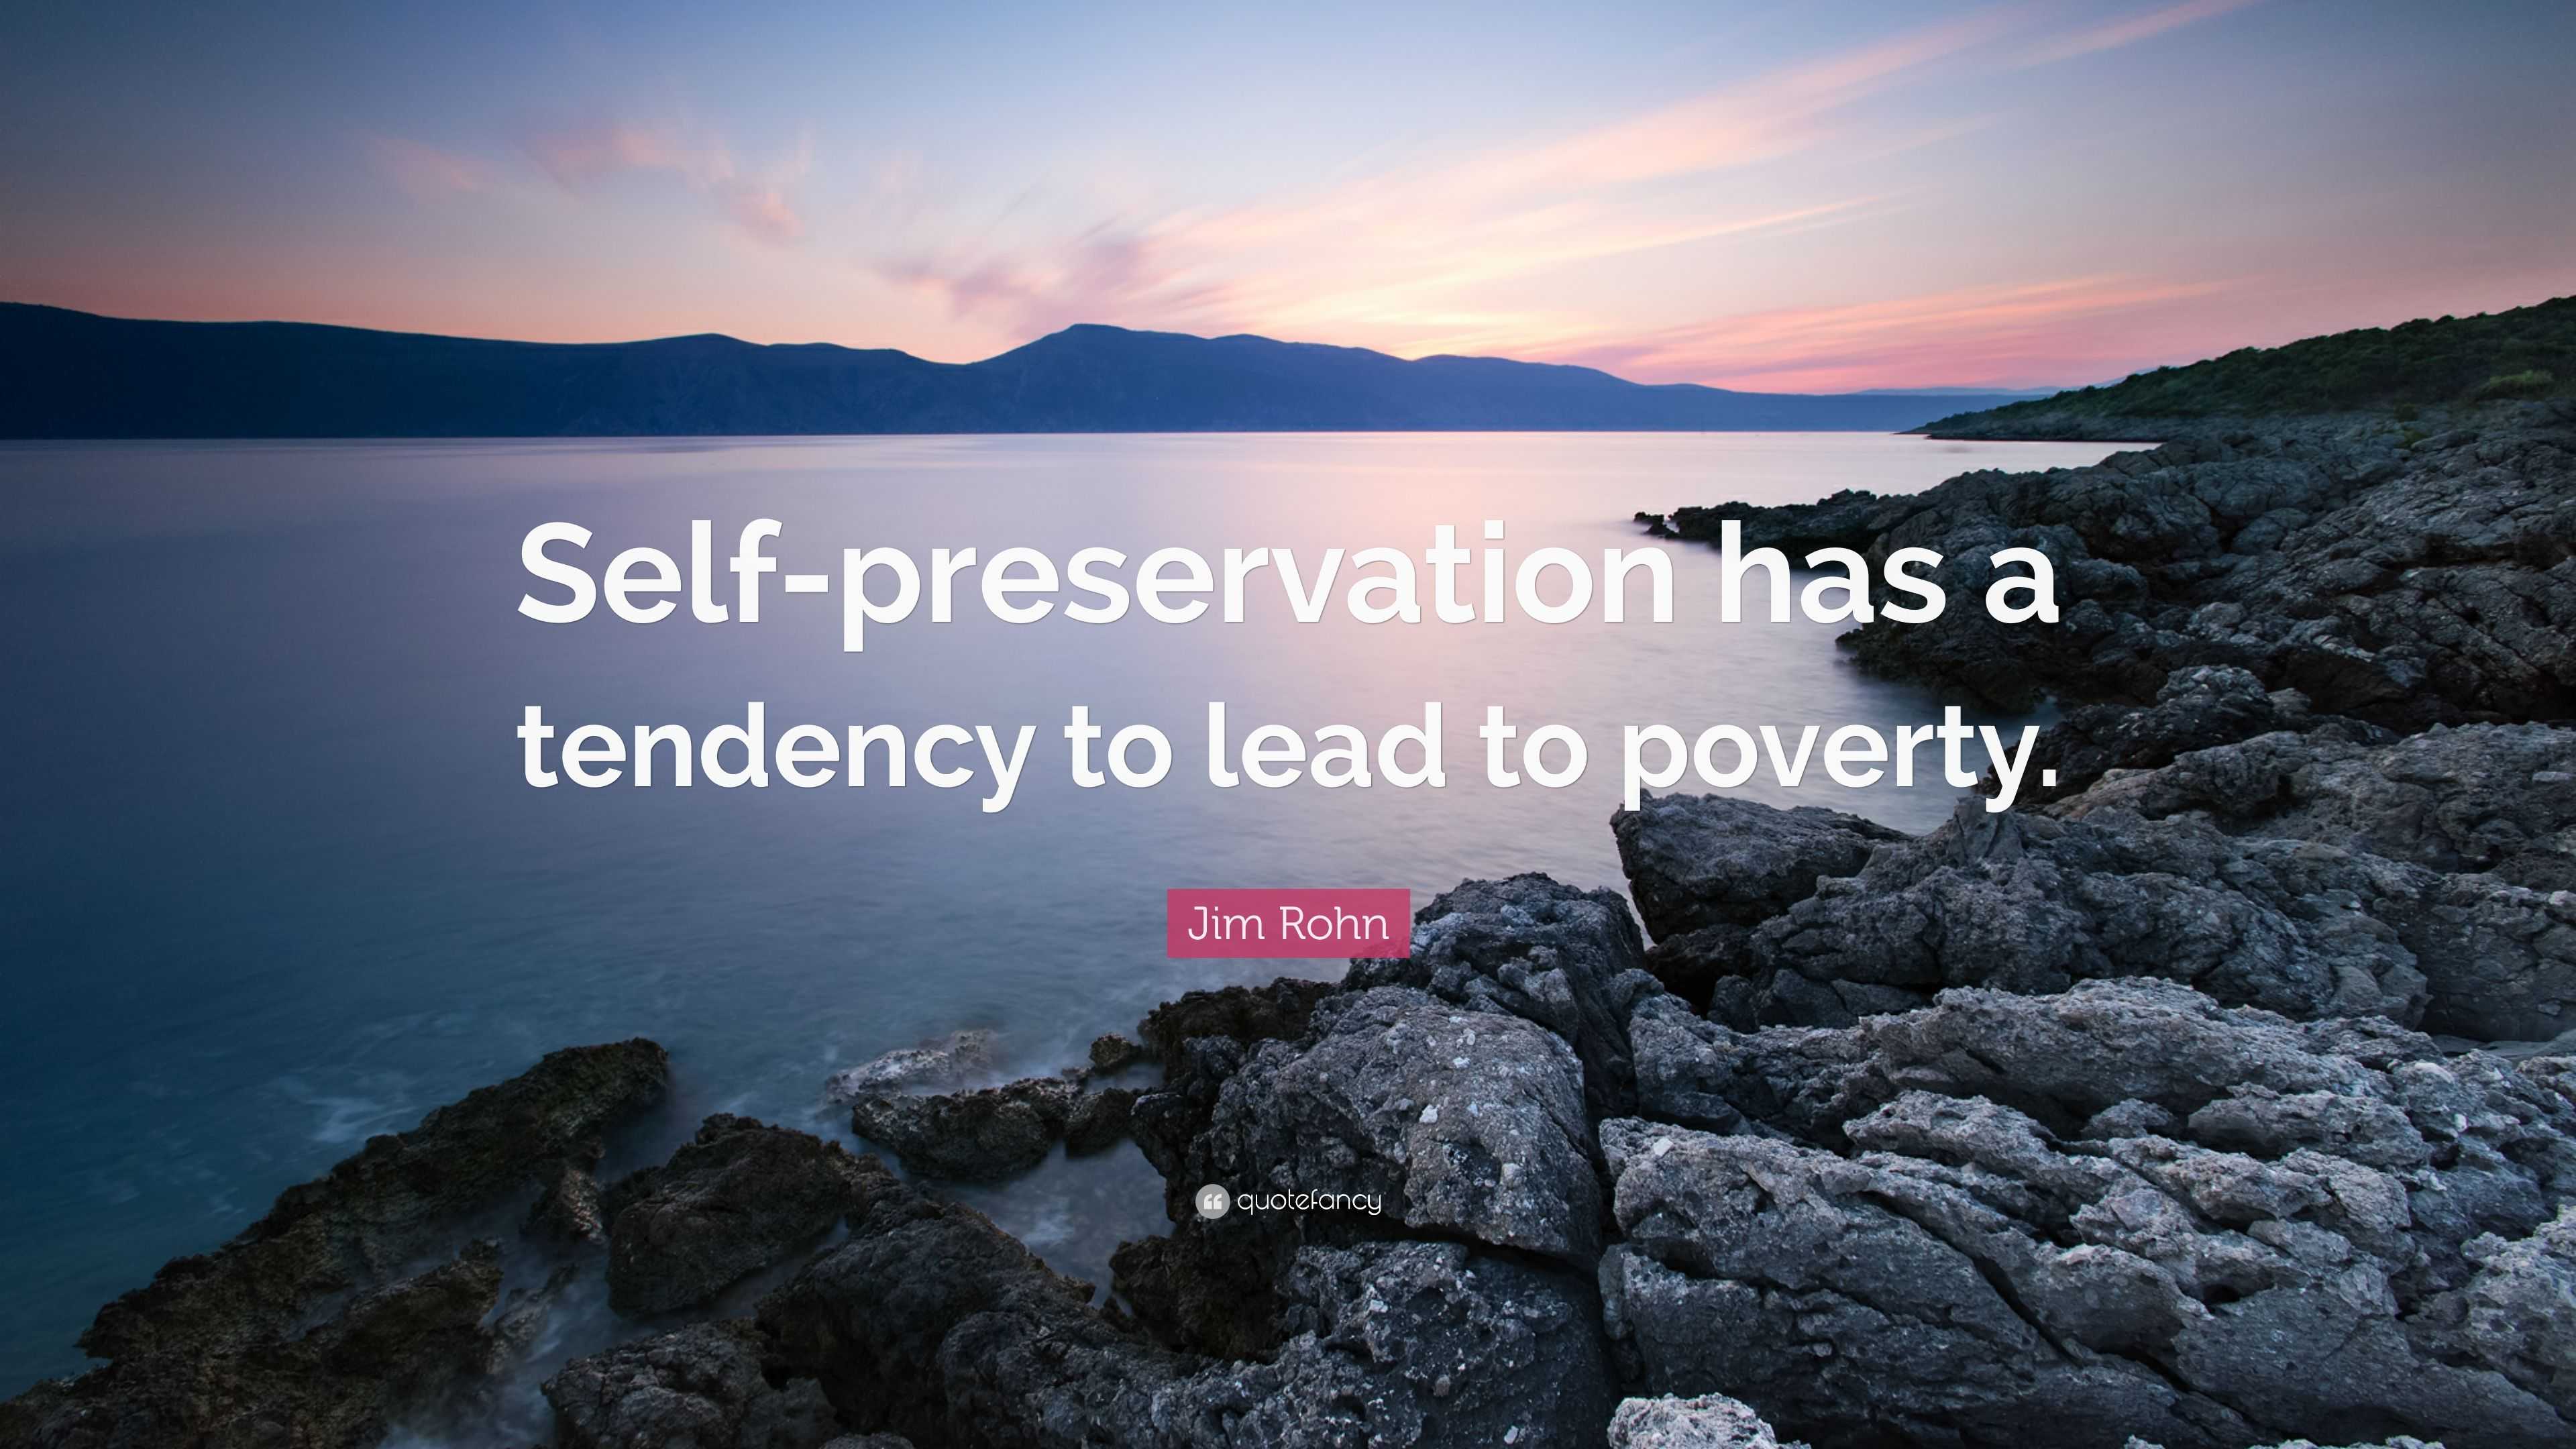 Jim Rohn Quote: "Self-preservation has a tendency to lead ...